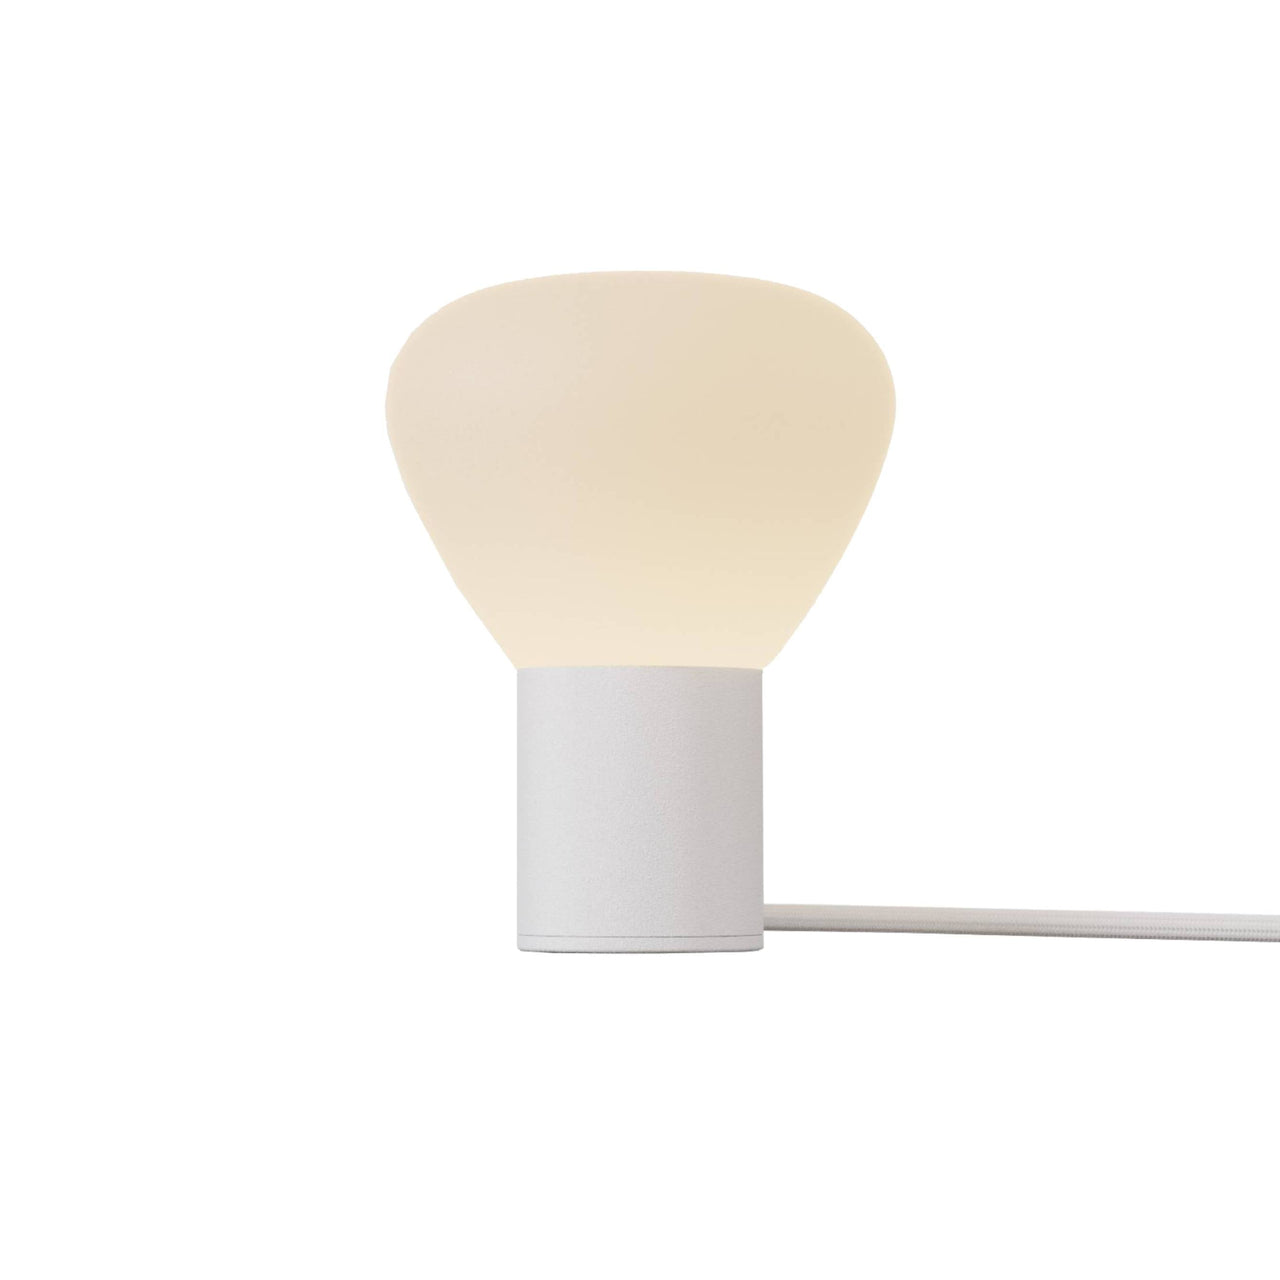 Parc 01 Table Lamp: Footswitch +  White + White